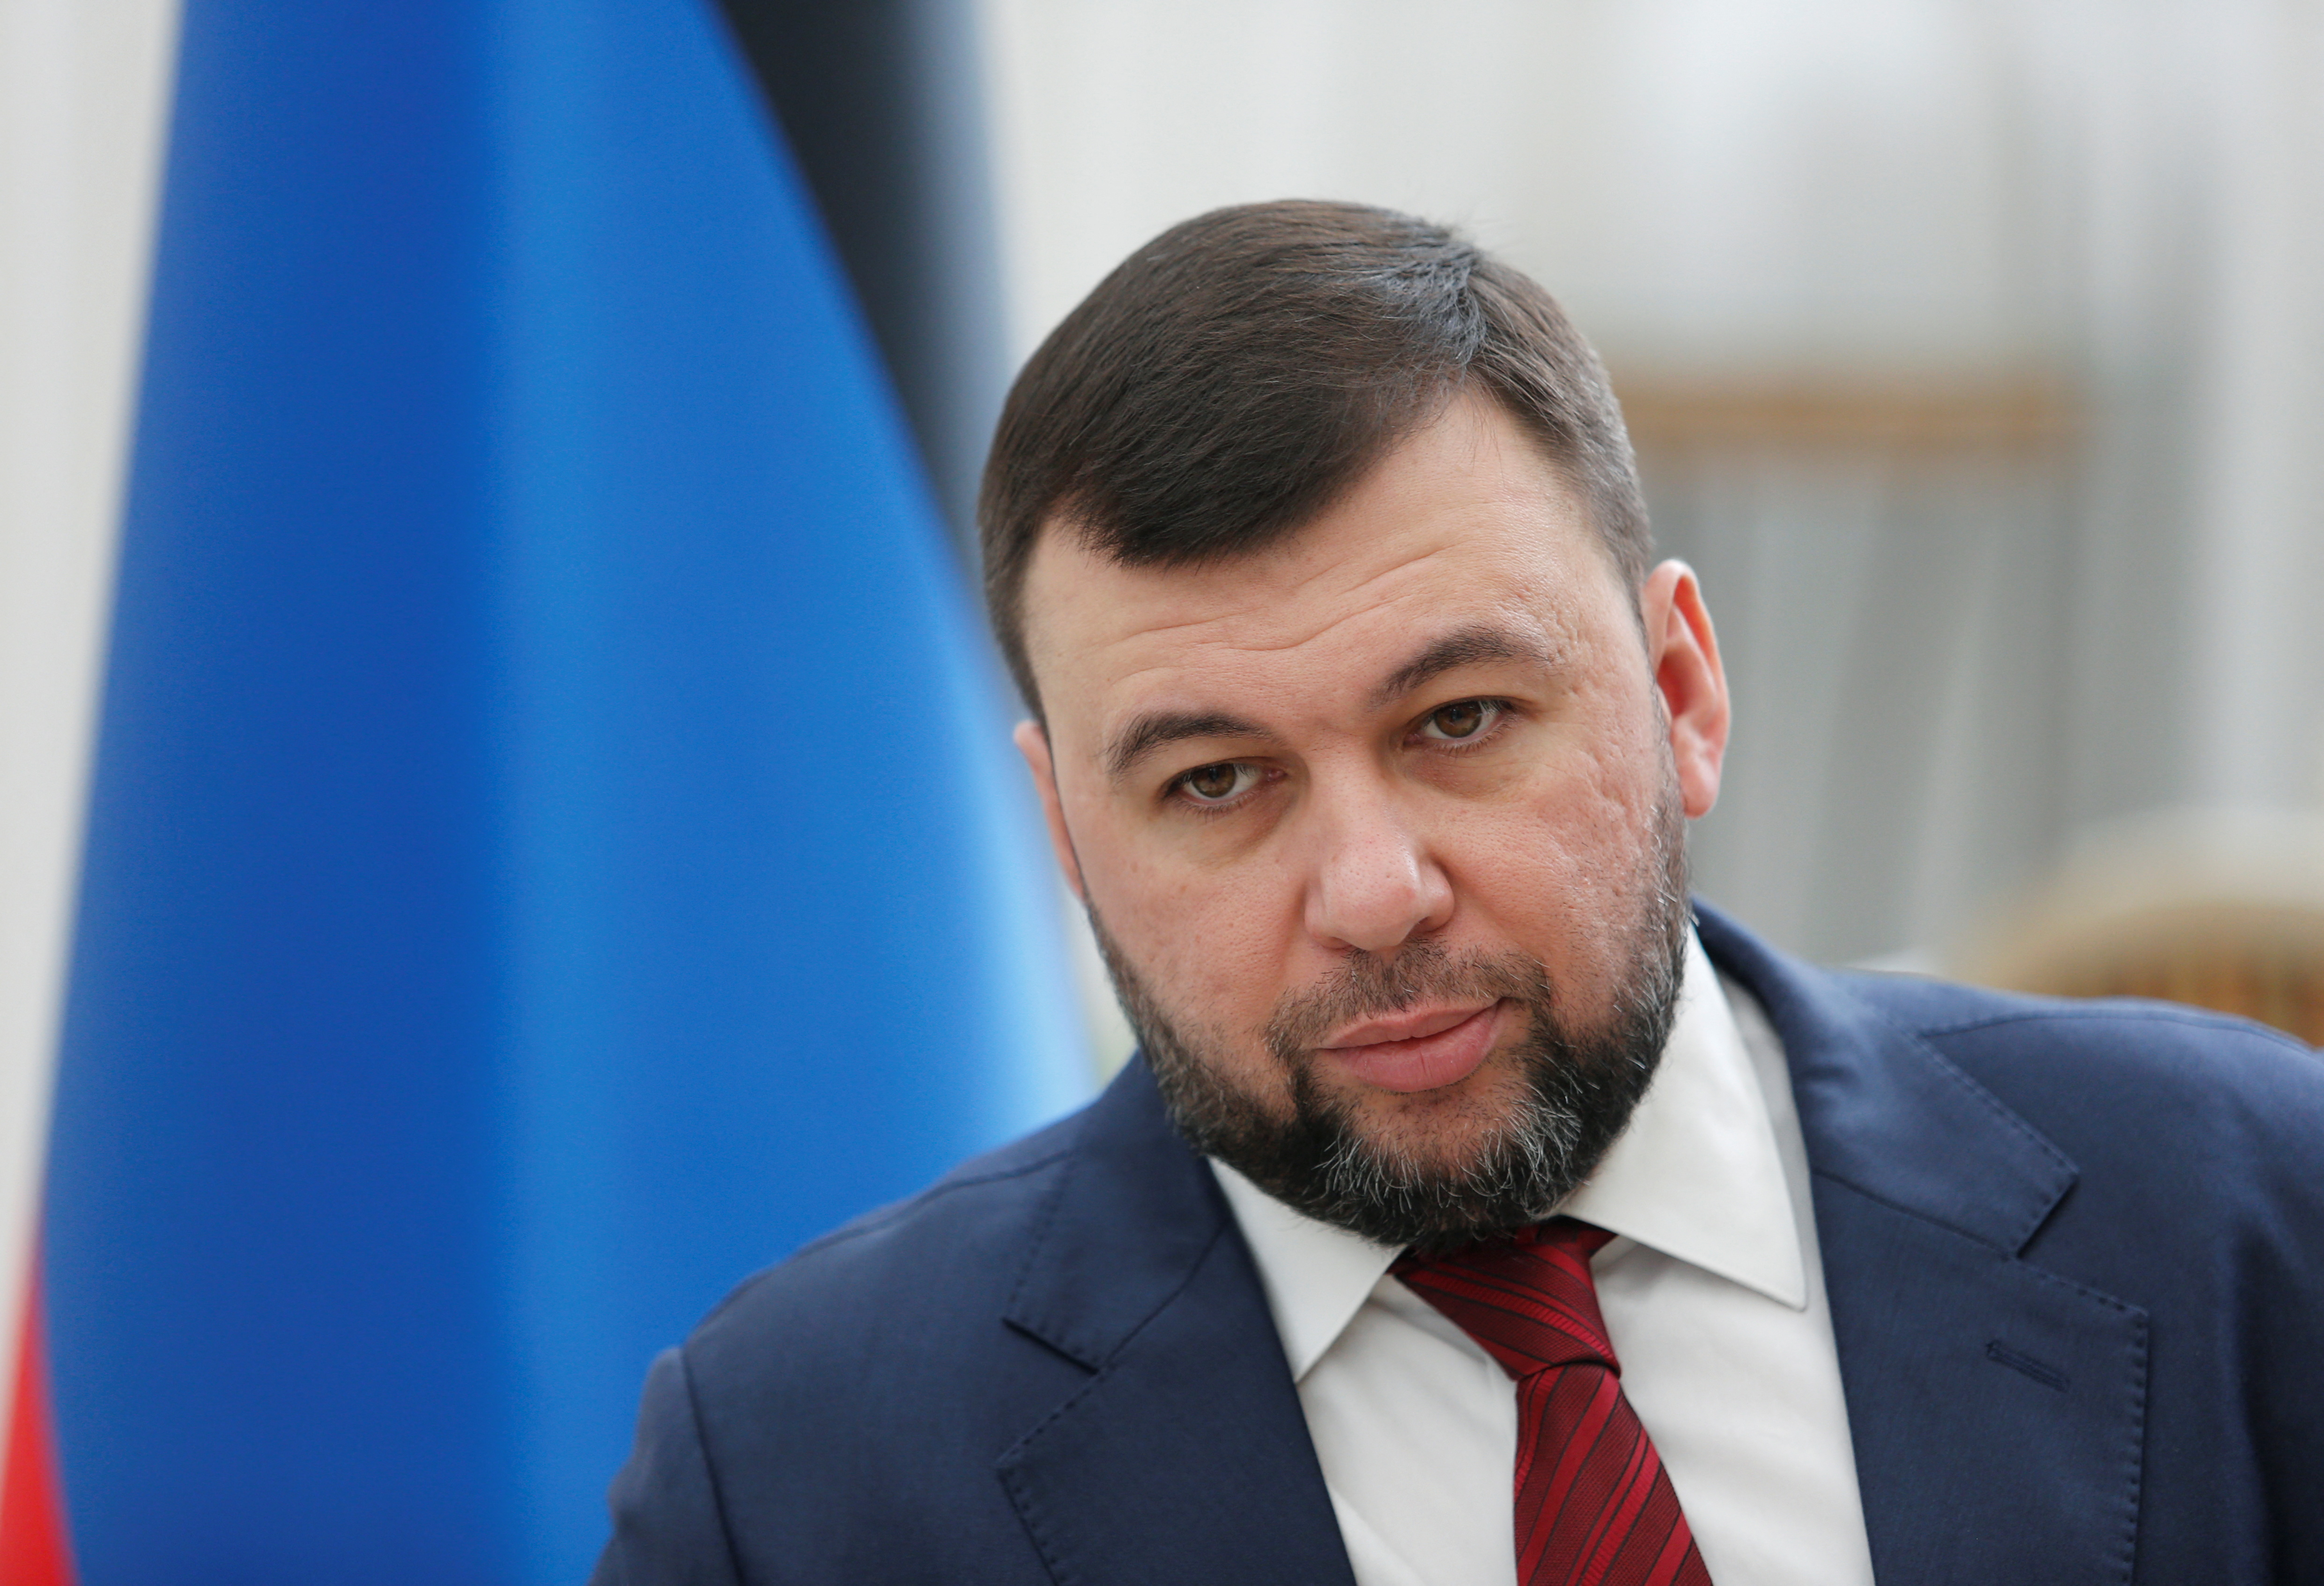 Head of the self-proclaimed Donetsk People's Republic Denis Pushilin attends an interview in Donetsk